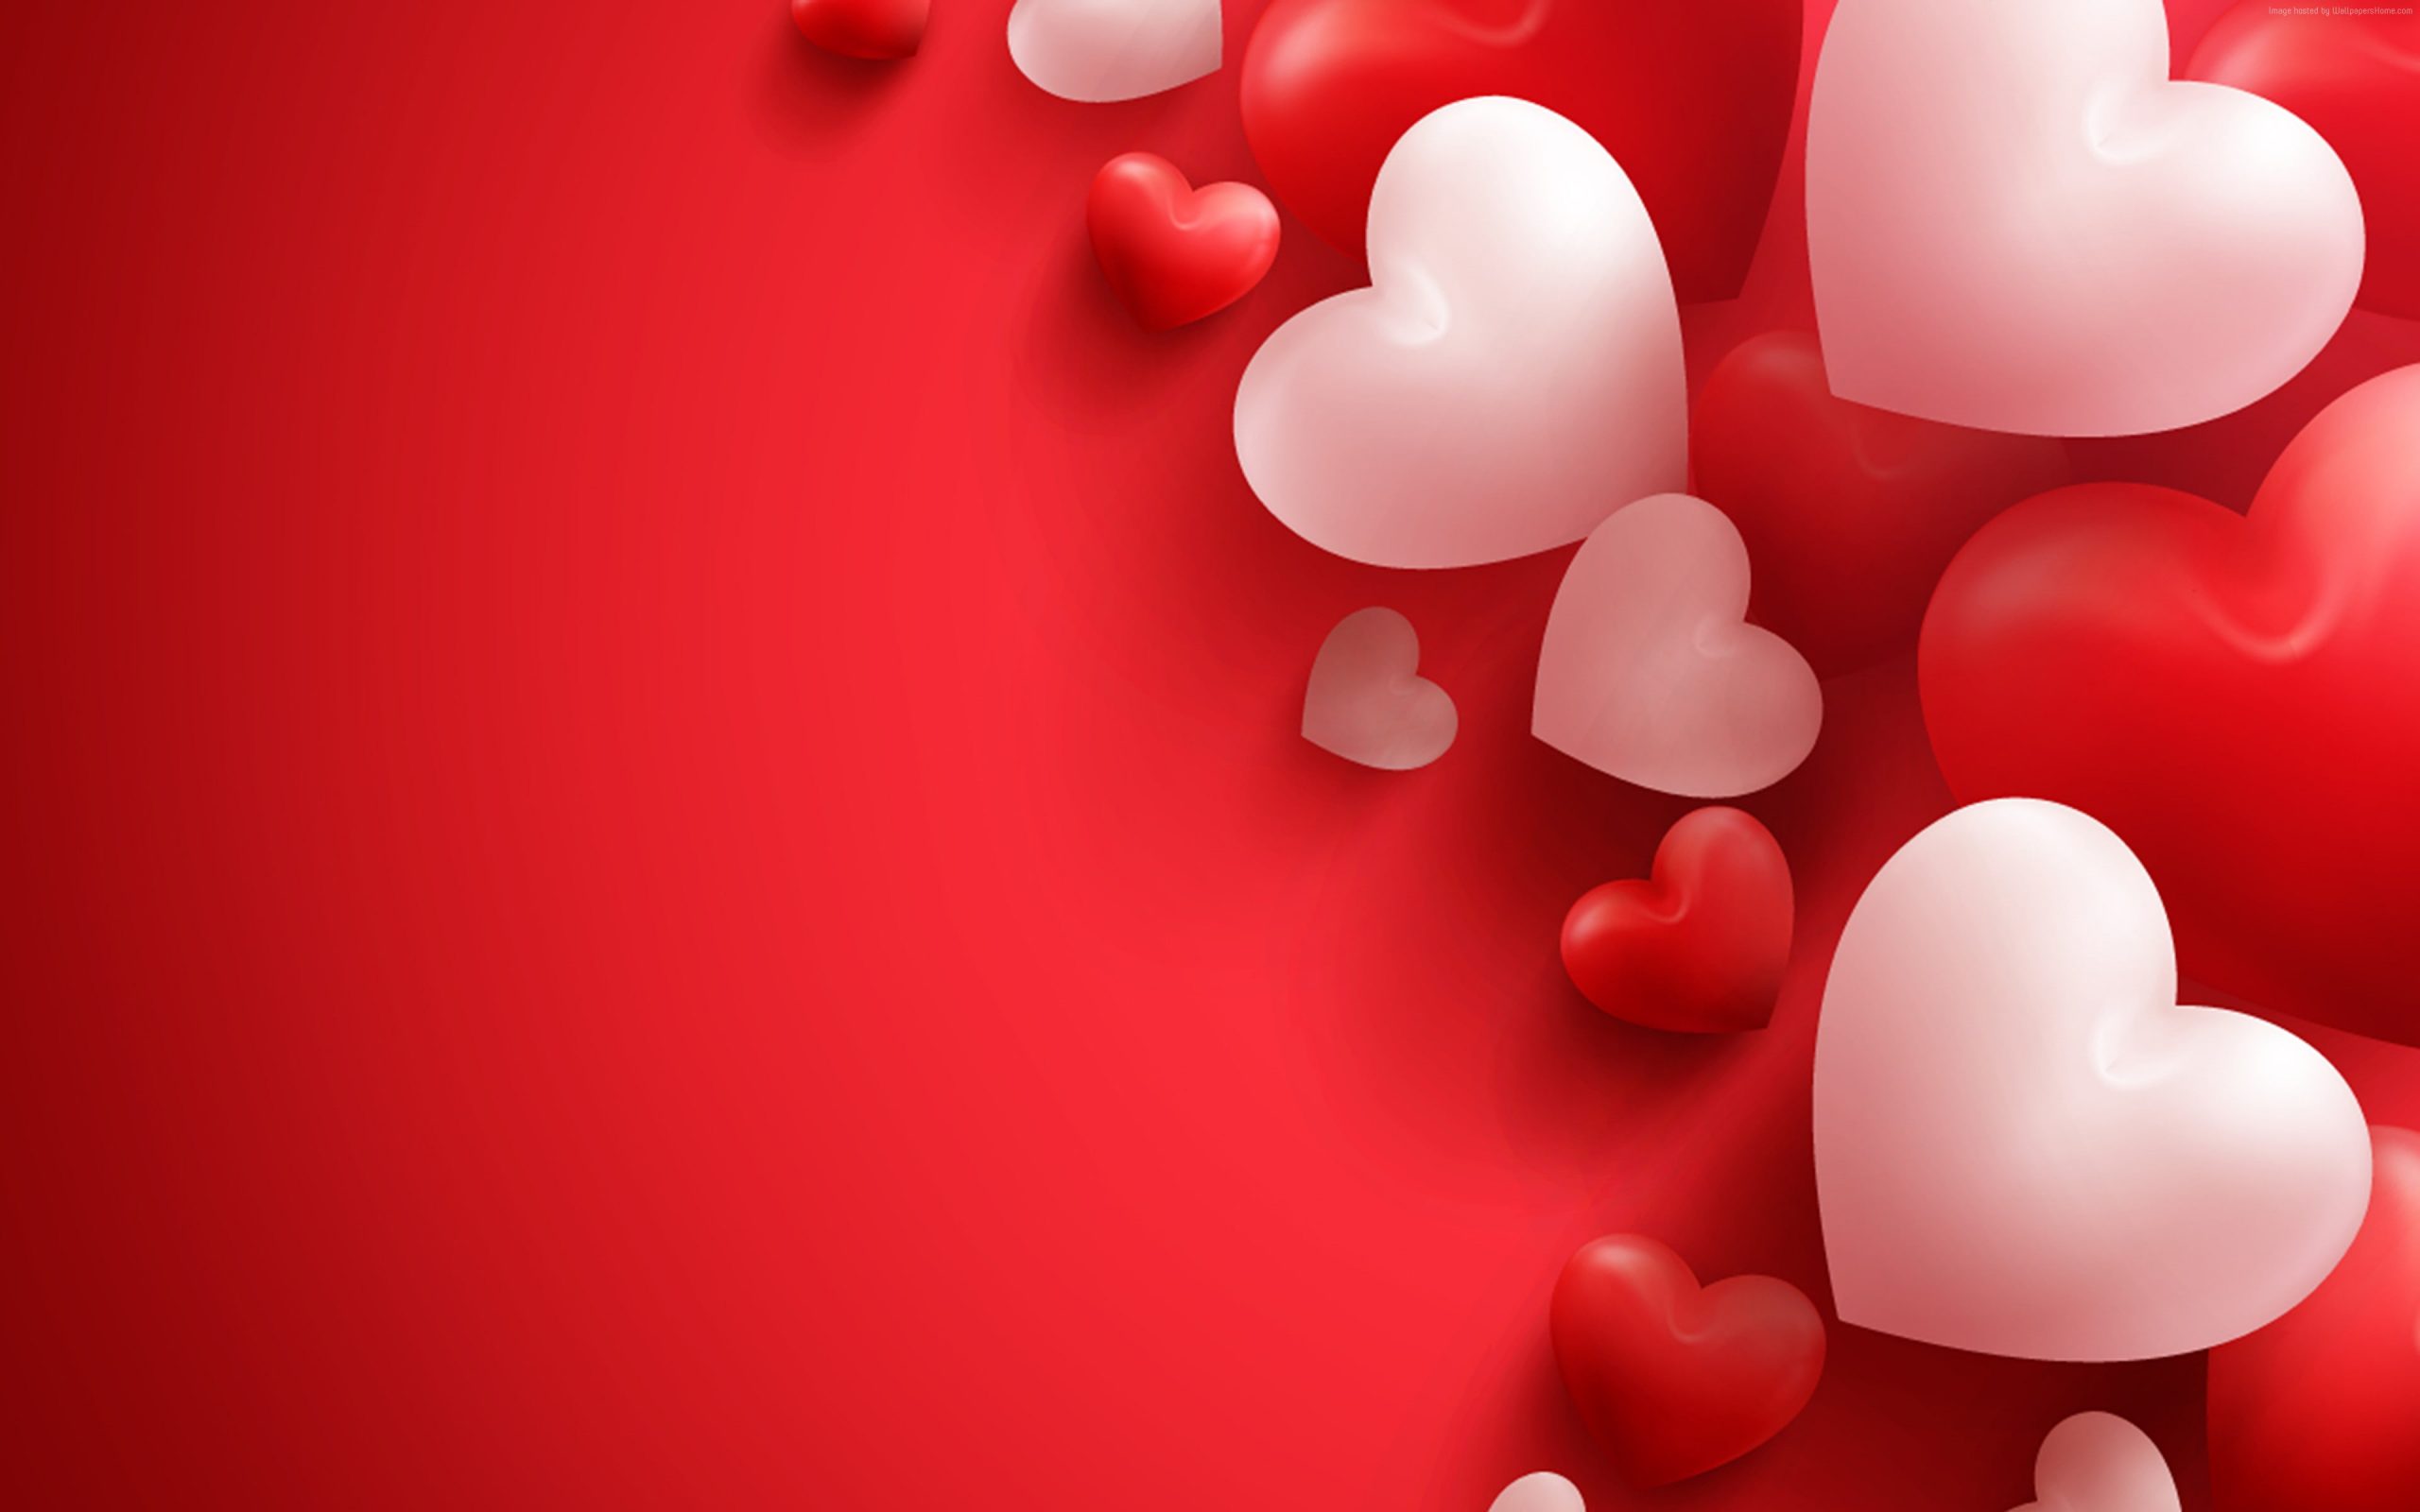 4k, heart, Valentines Day, love image, no people, red, balloon wallpaper